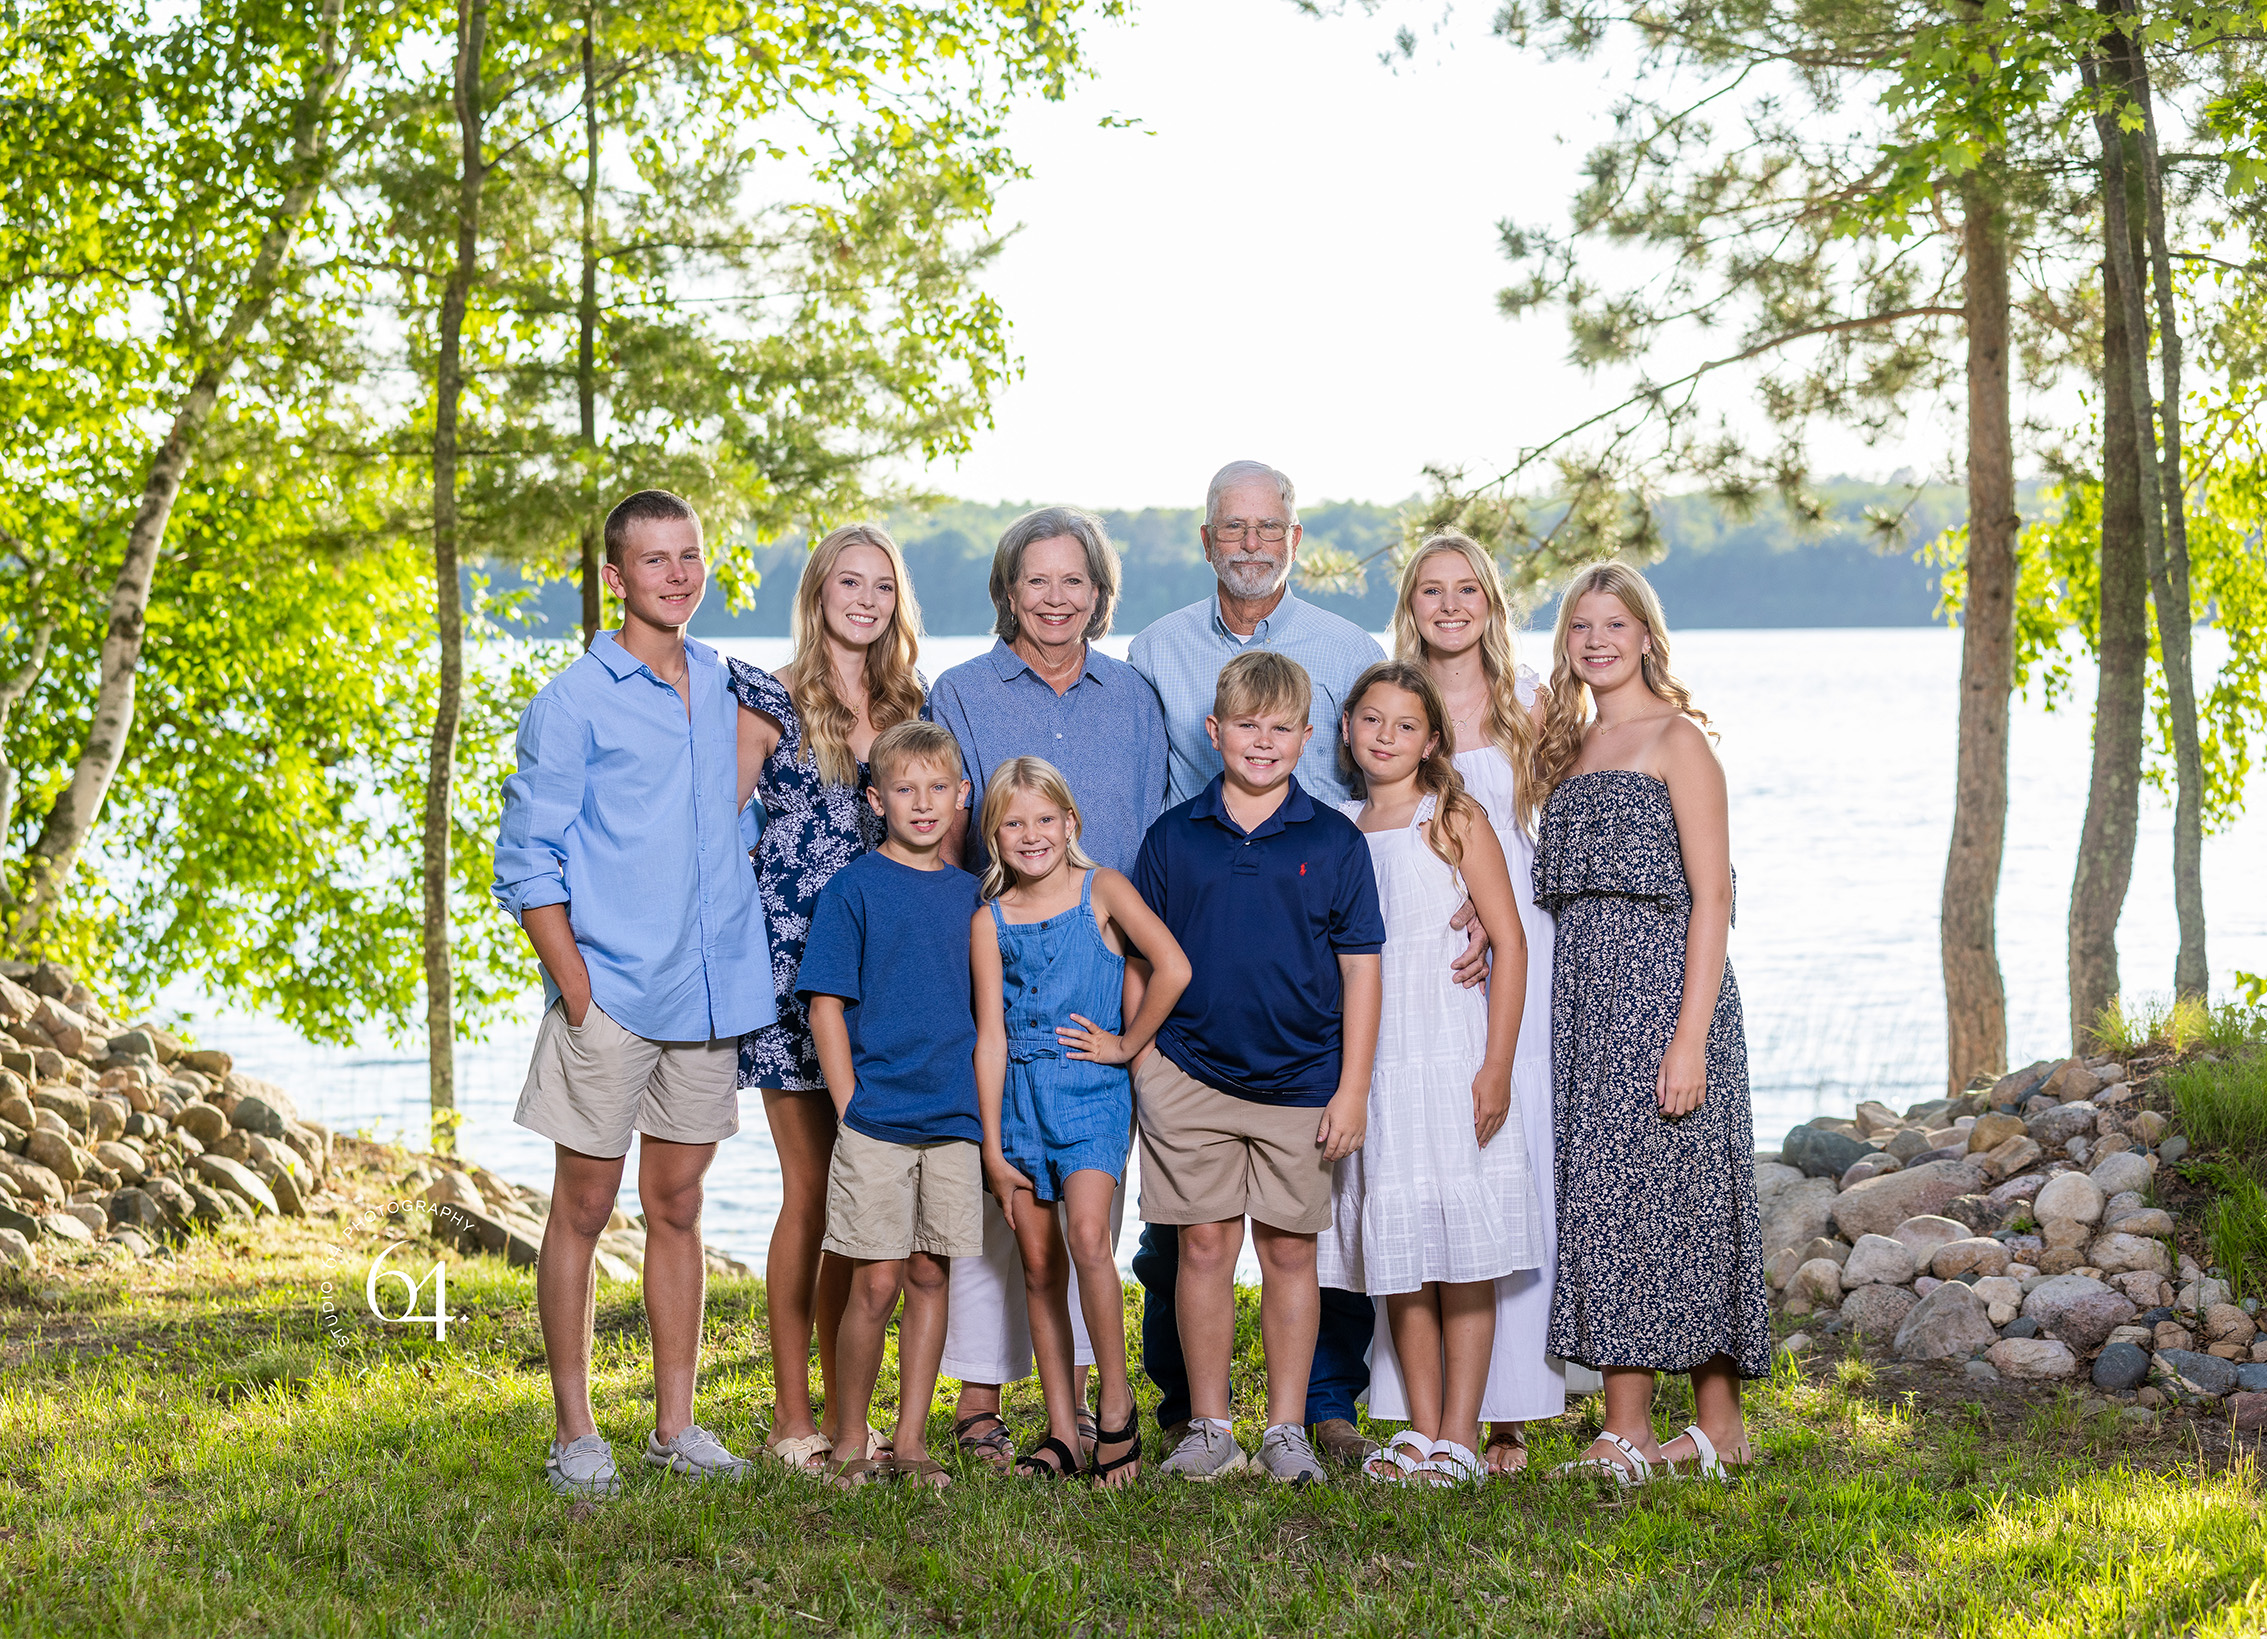 Family Portrait of Grandparents and Grandchildren in front of a Lake in Minnesota during summertime.